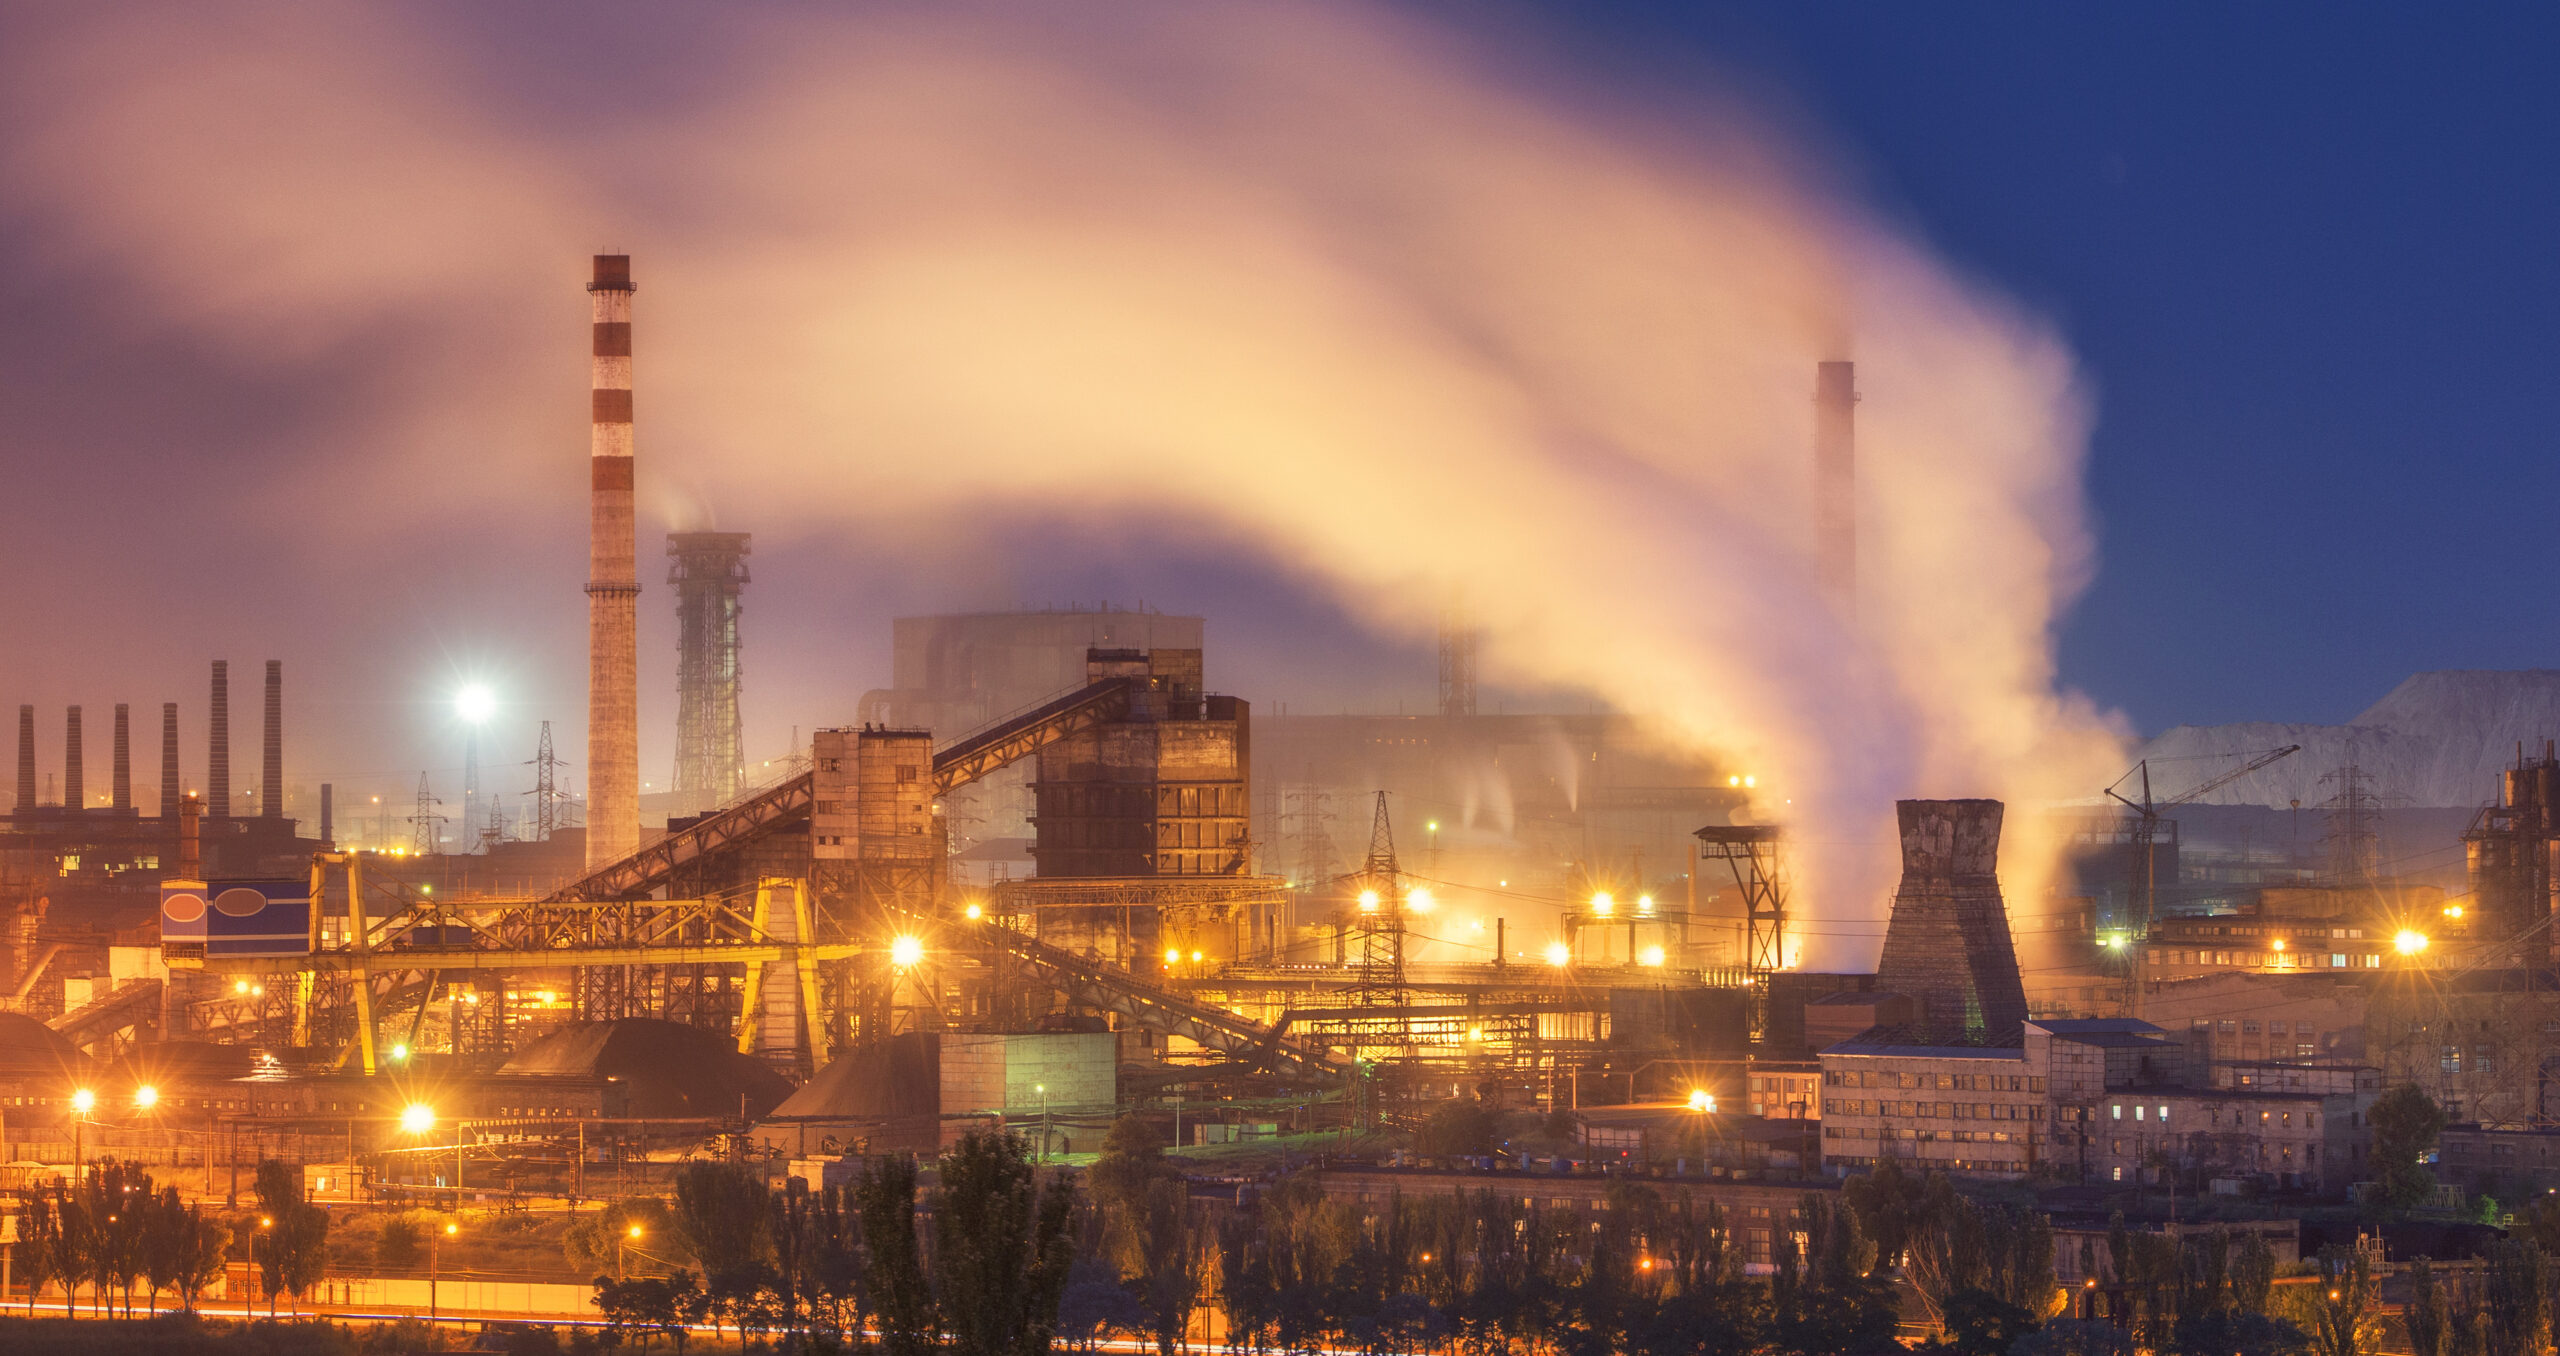 Draft NECPs would only reduce emissions by 51 per cent, rather than the planned 55 per cent, according to EU analysis (Photo: den-belitsky/Envato) 